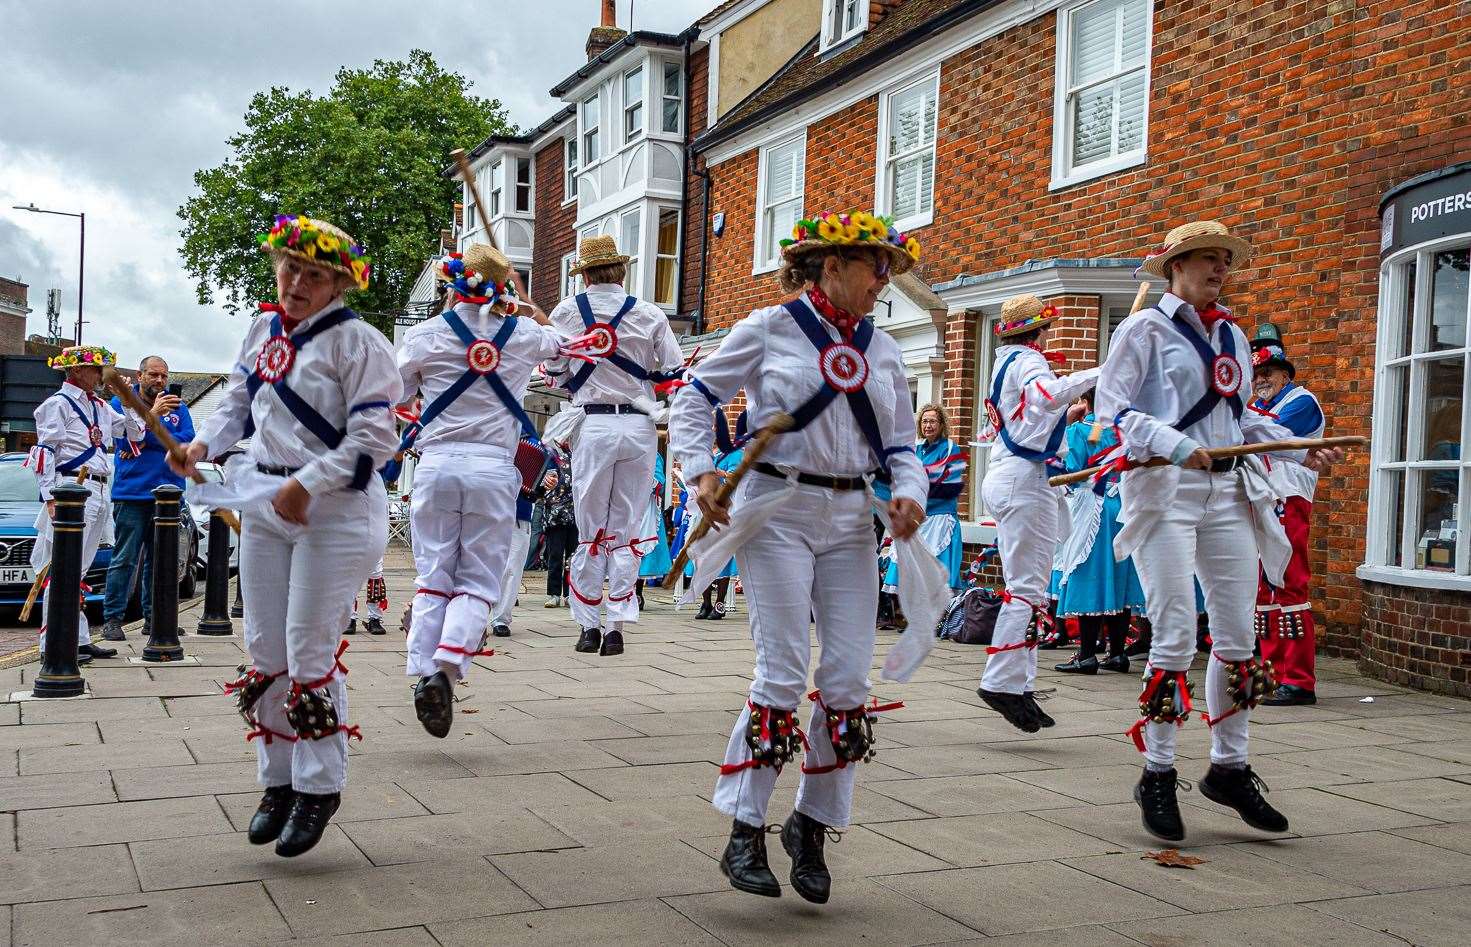 Morris dancers, folk musicians and traditional craftmakers will be at this year's Tenterden Folk Festival. Photo: Philip L Hinton